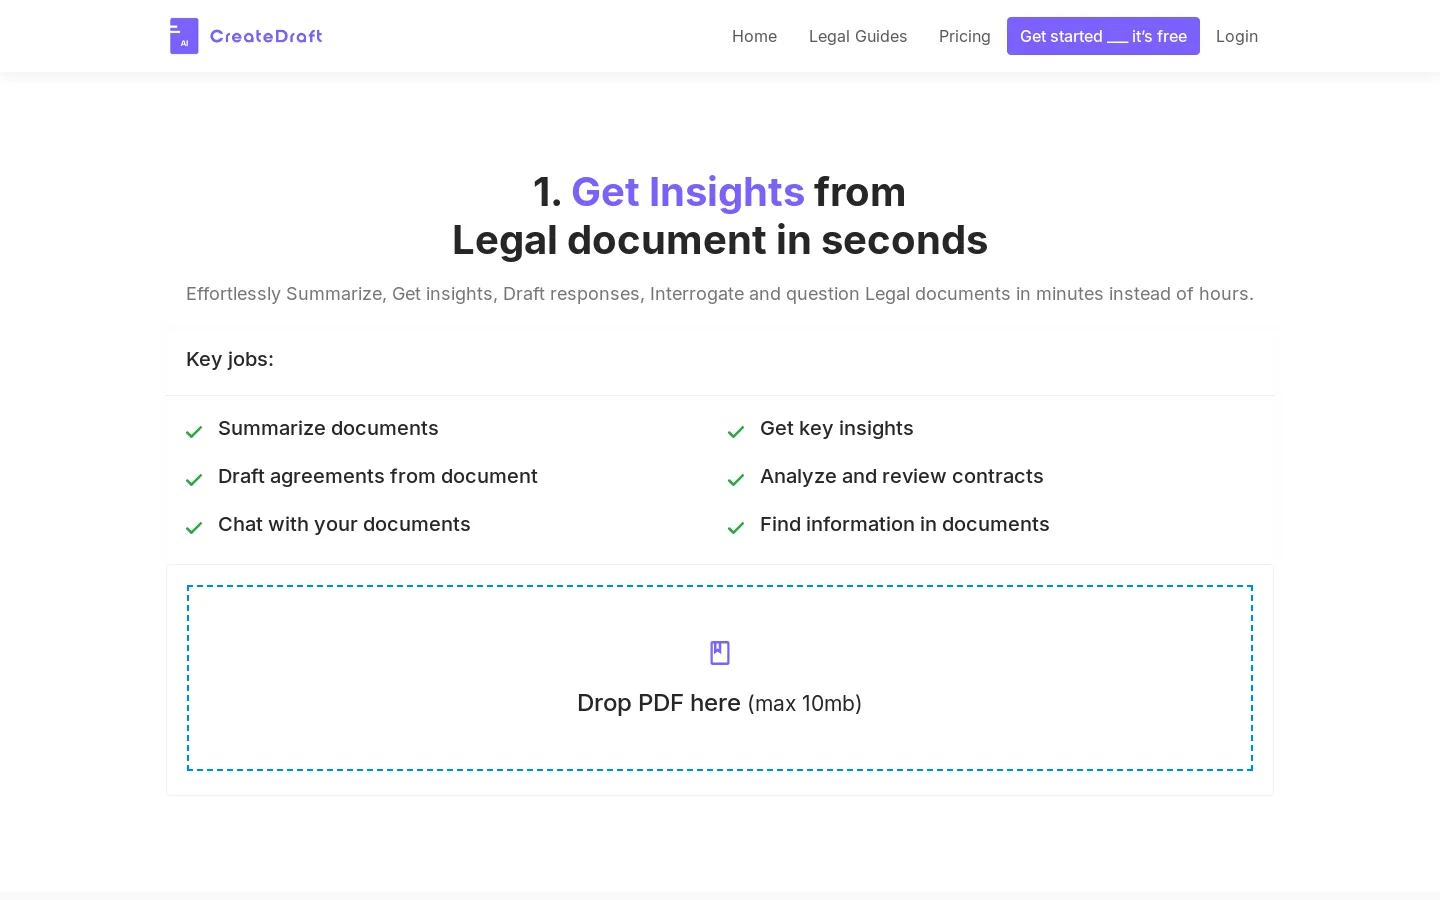 CreateDraft - Draft or Insights from any Legal document in seconds